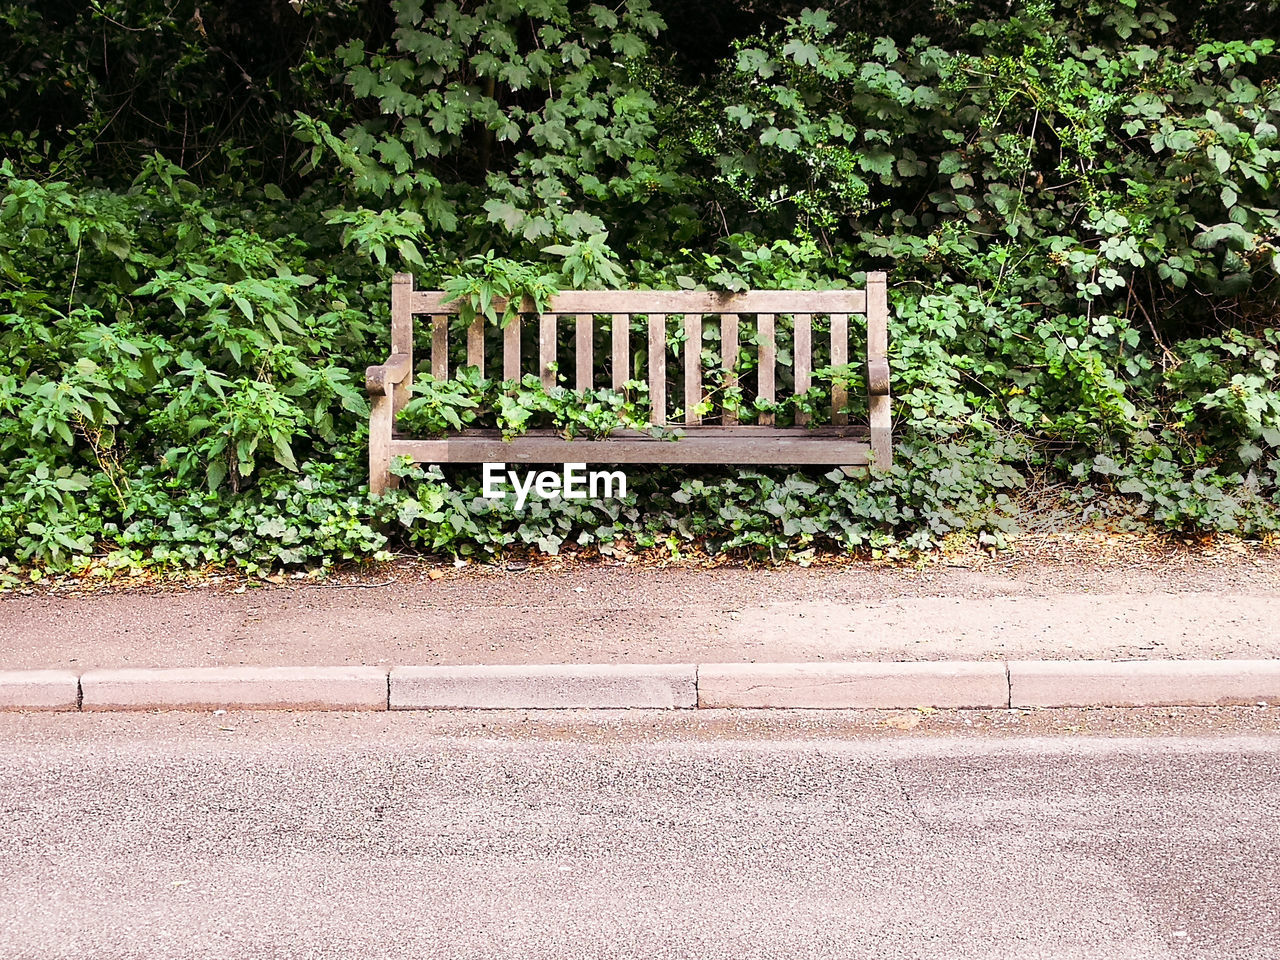 EMPTY BENCH BY ROAD IN CITY